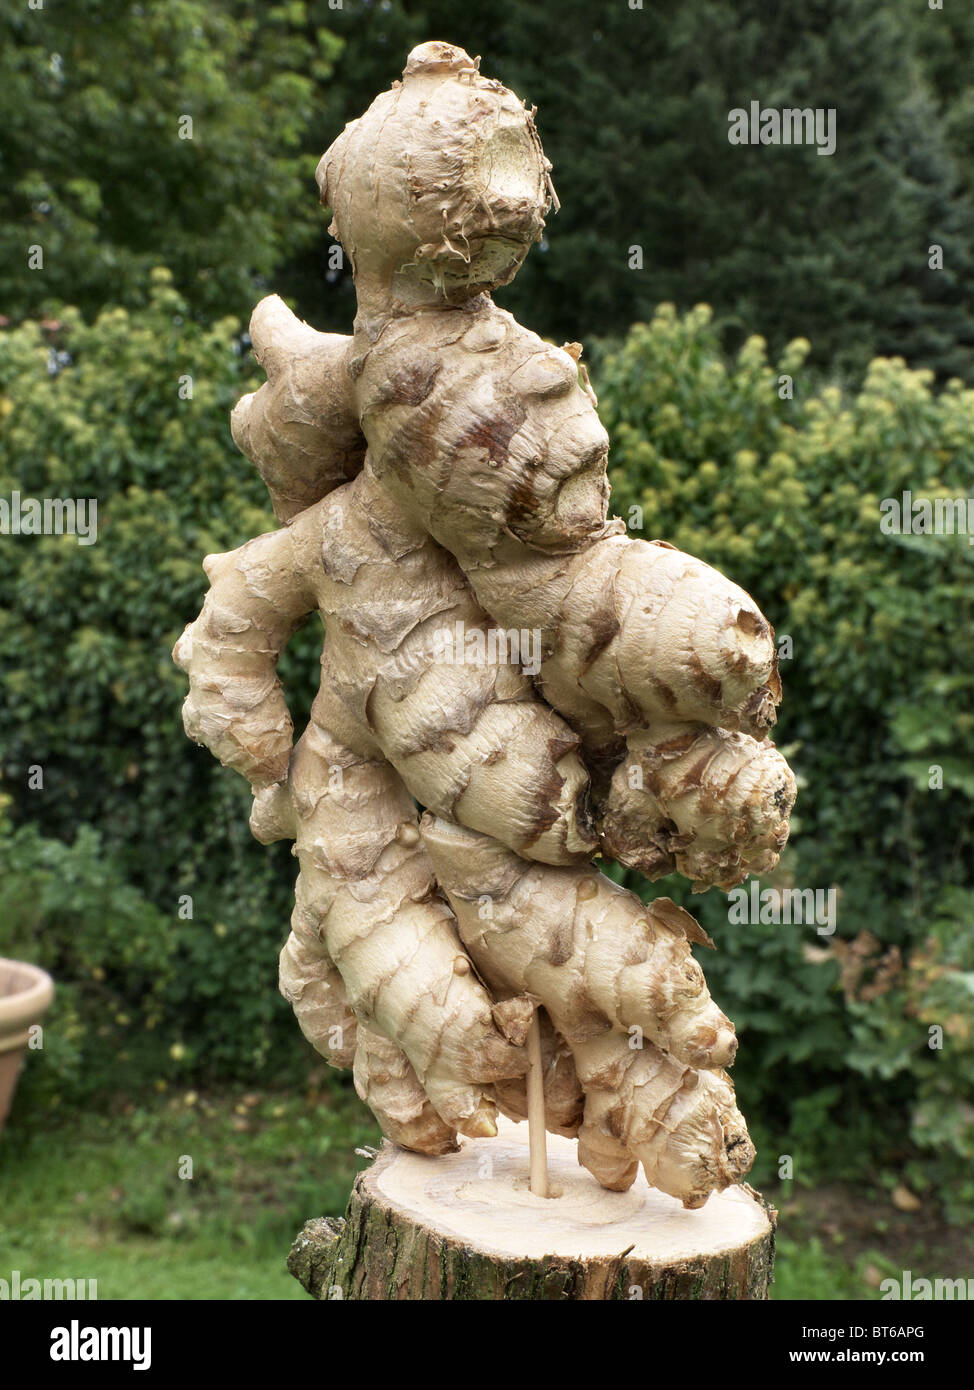 Ginger root looking like a sculpture Stock Photo